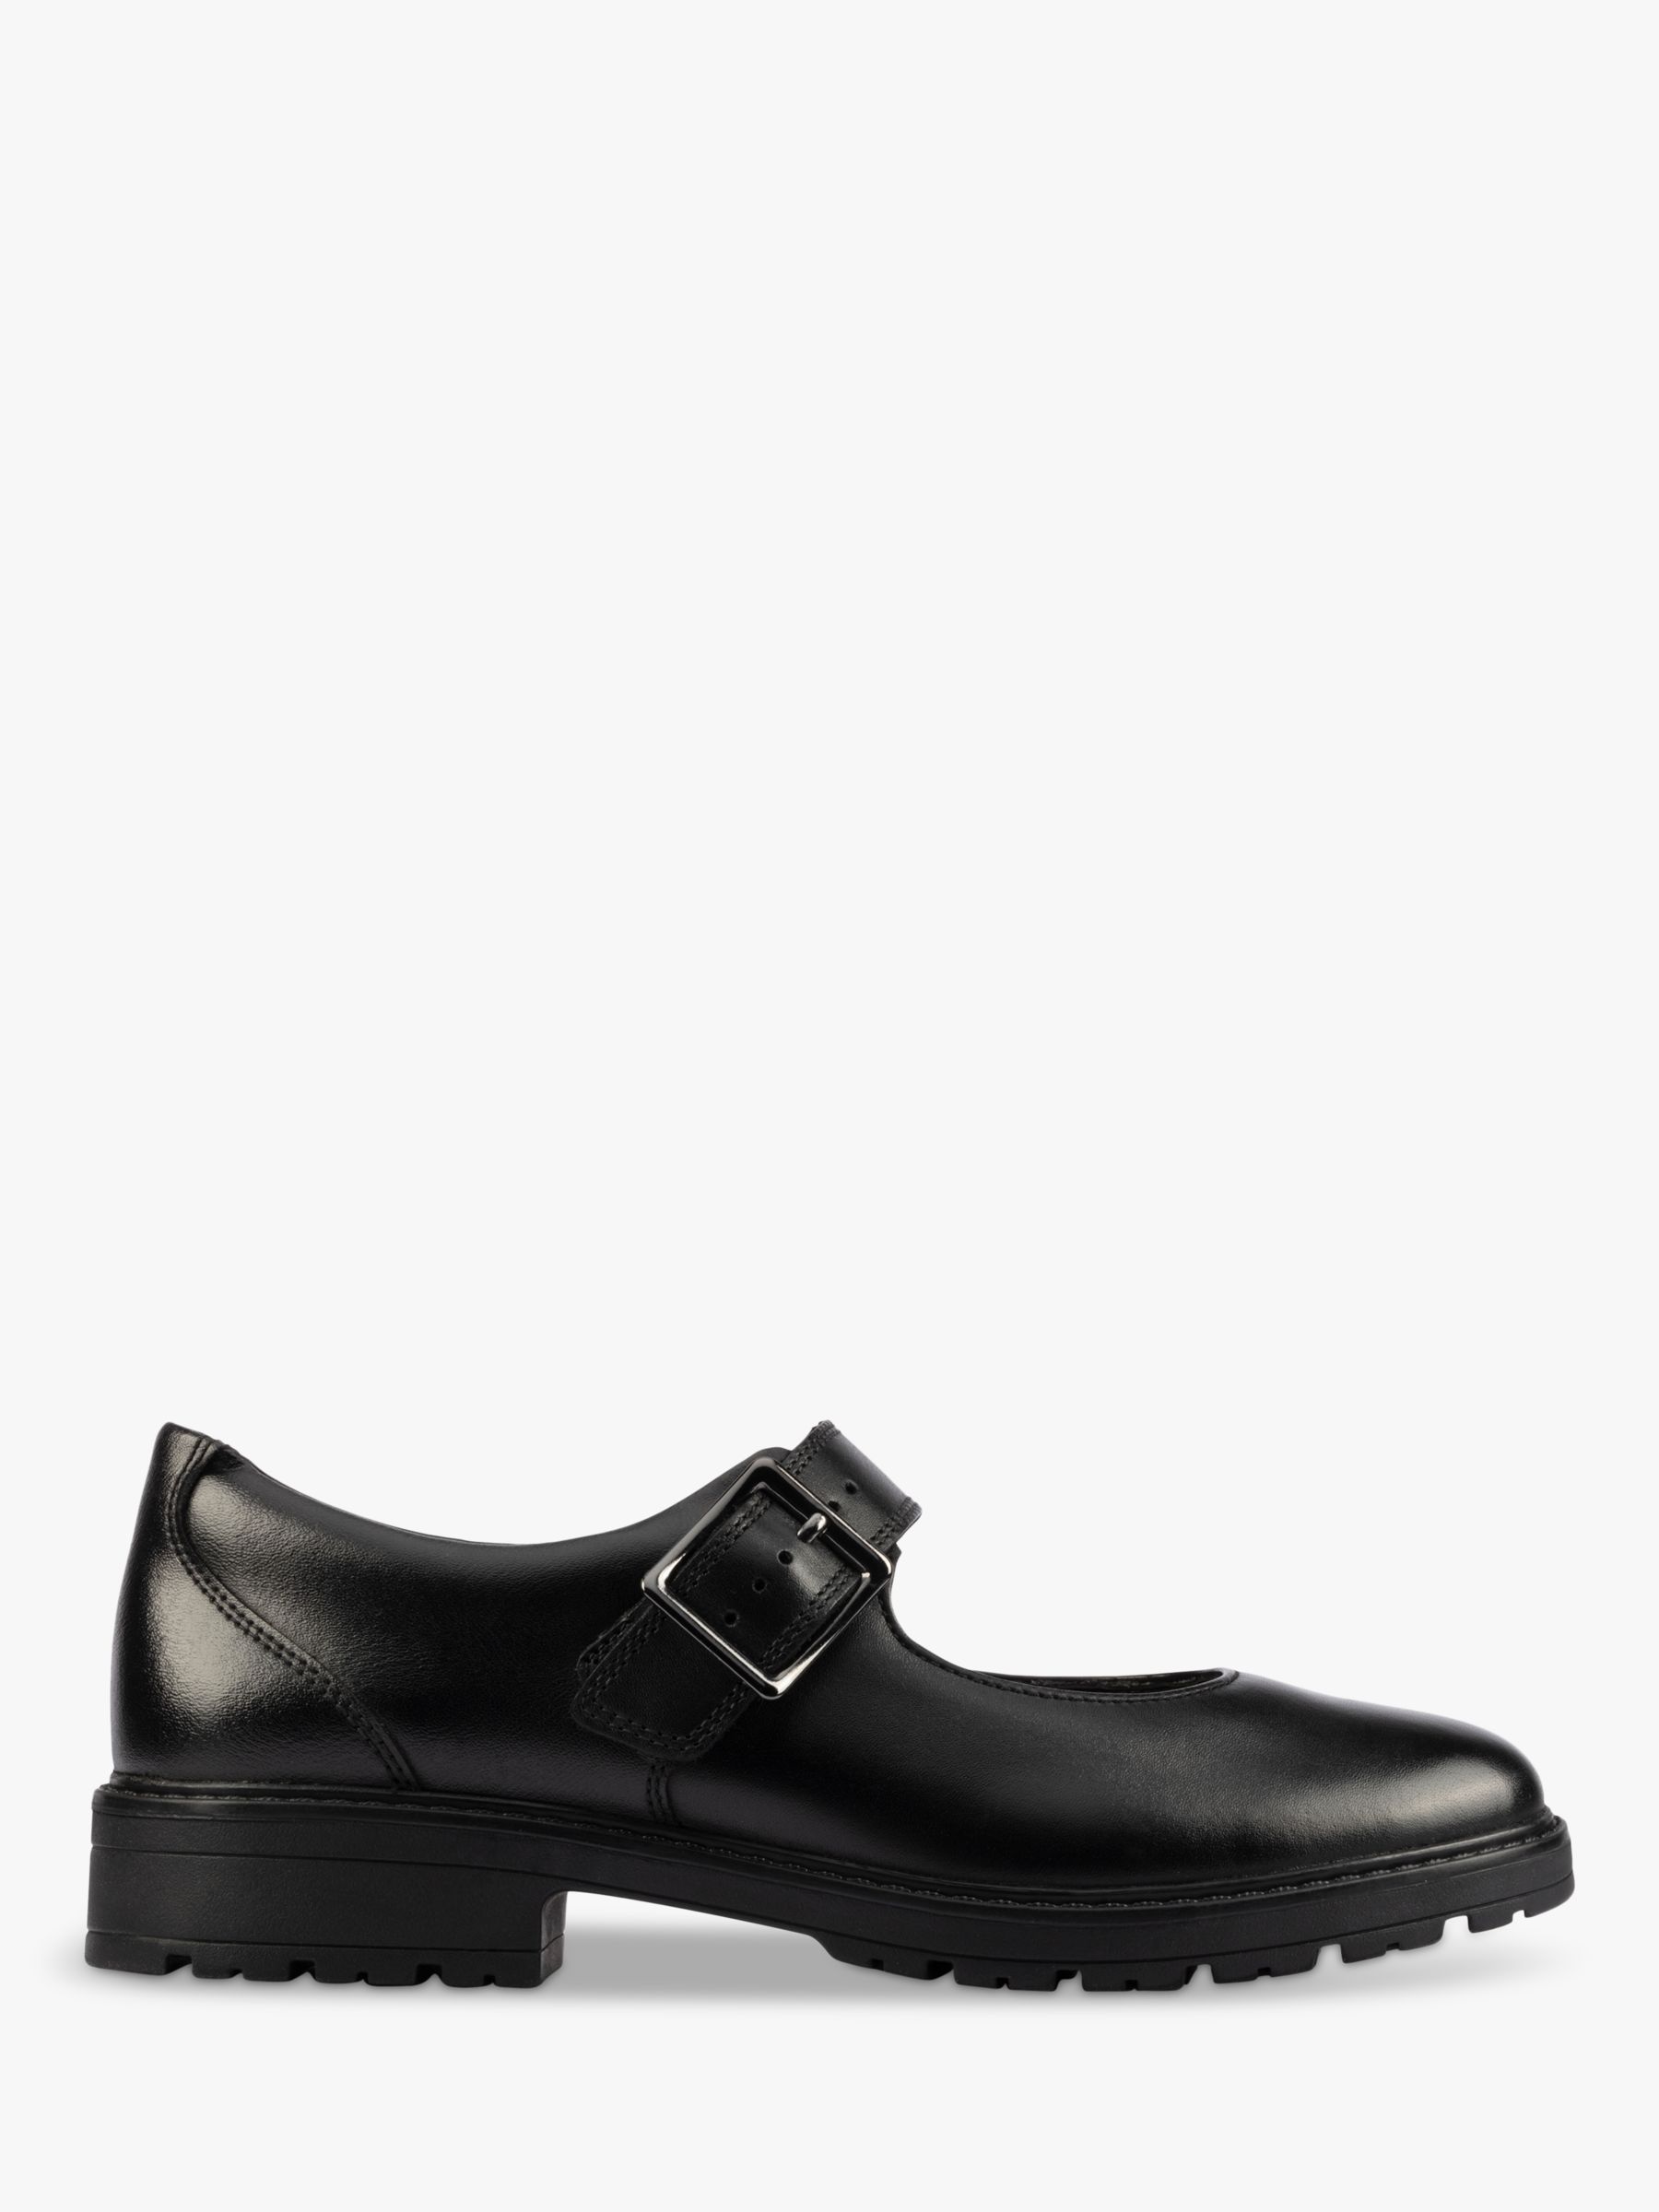 Clarks Loxham Craft Youth School Shoes - Black Leather